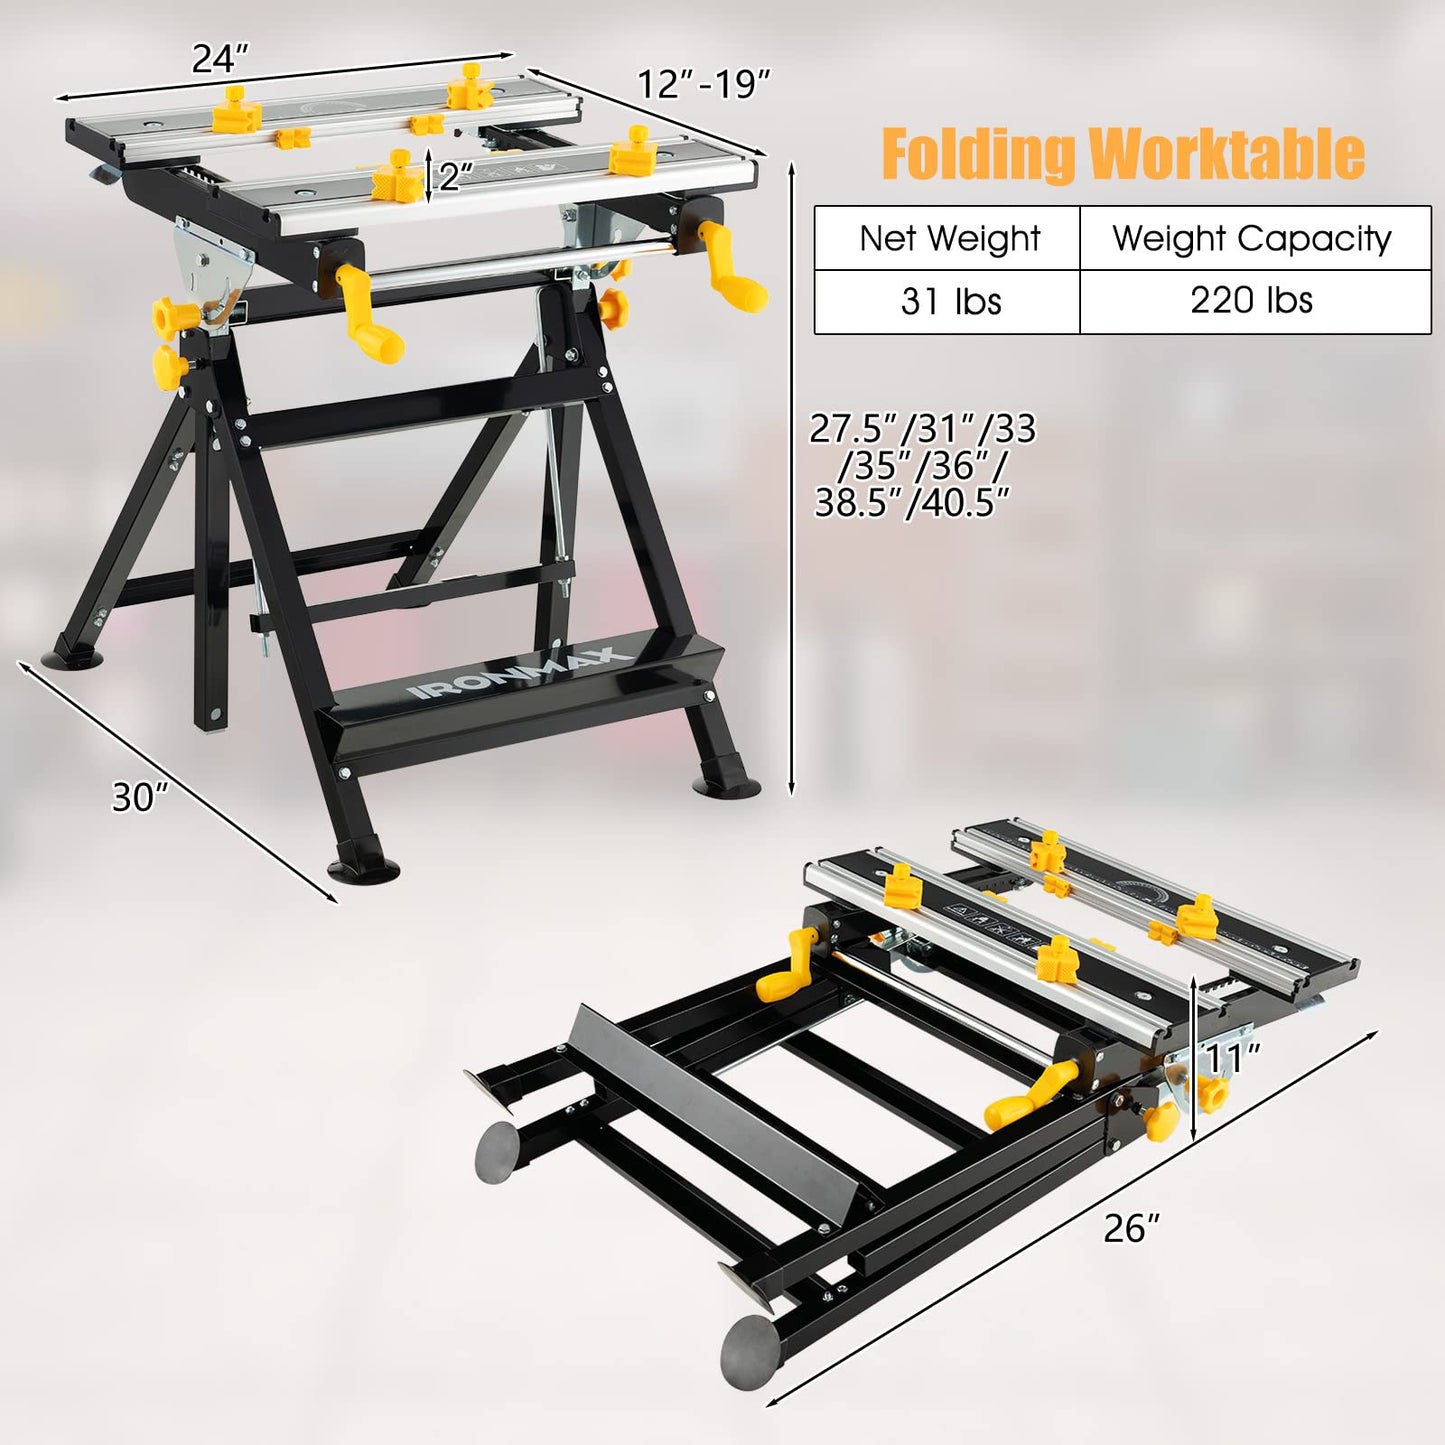 IRONMAX Portable Work Bench, 7-Level Height Adjustable & Reclining Work Table w/ 8 Sliding Clamps, Folding Workbench and Vise for Cutting, Saw, Paint